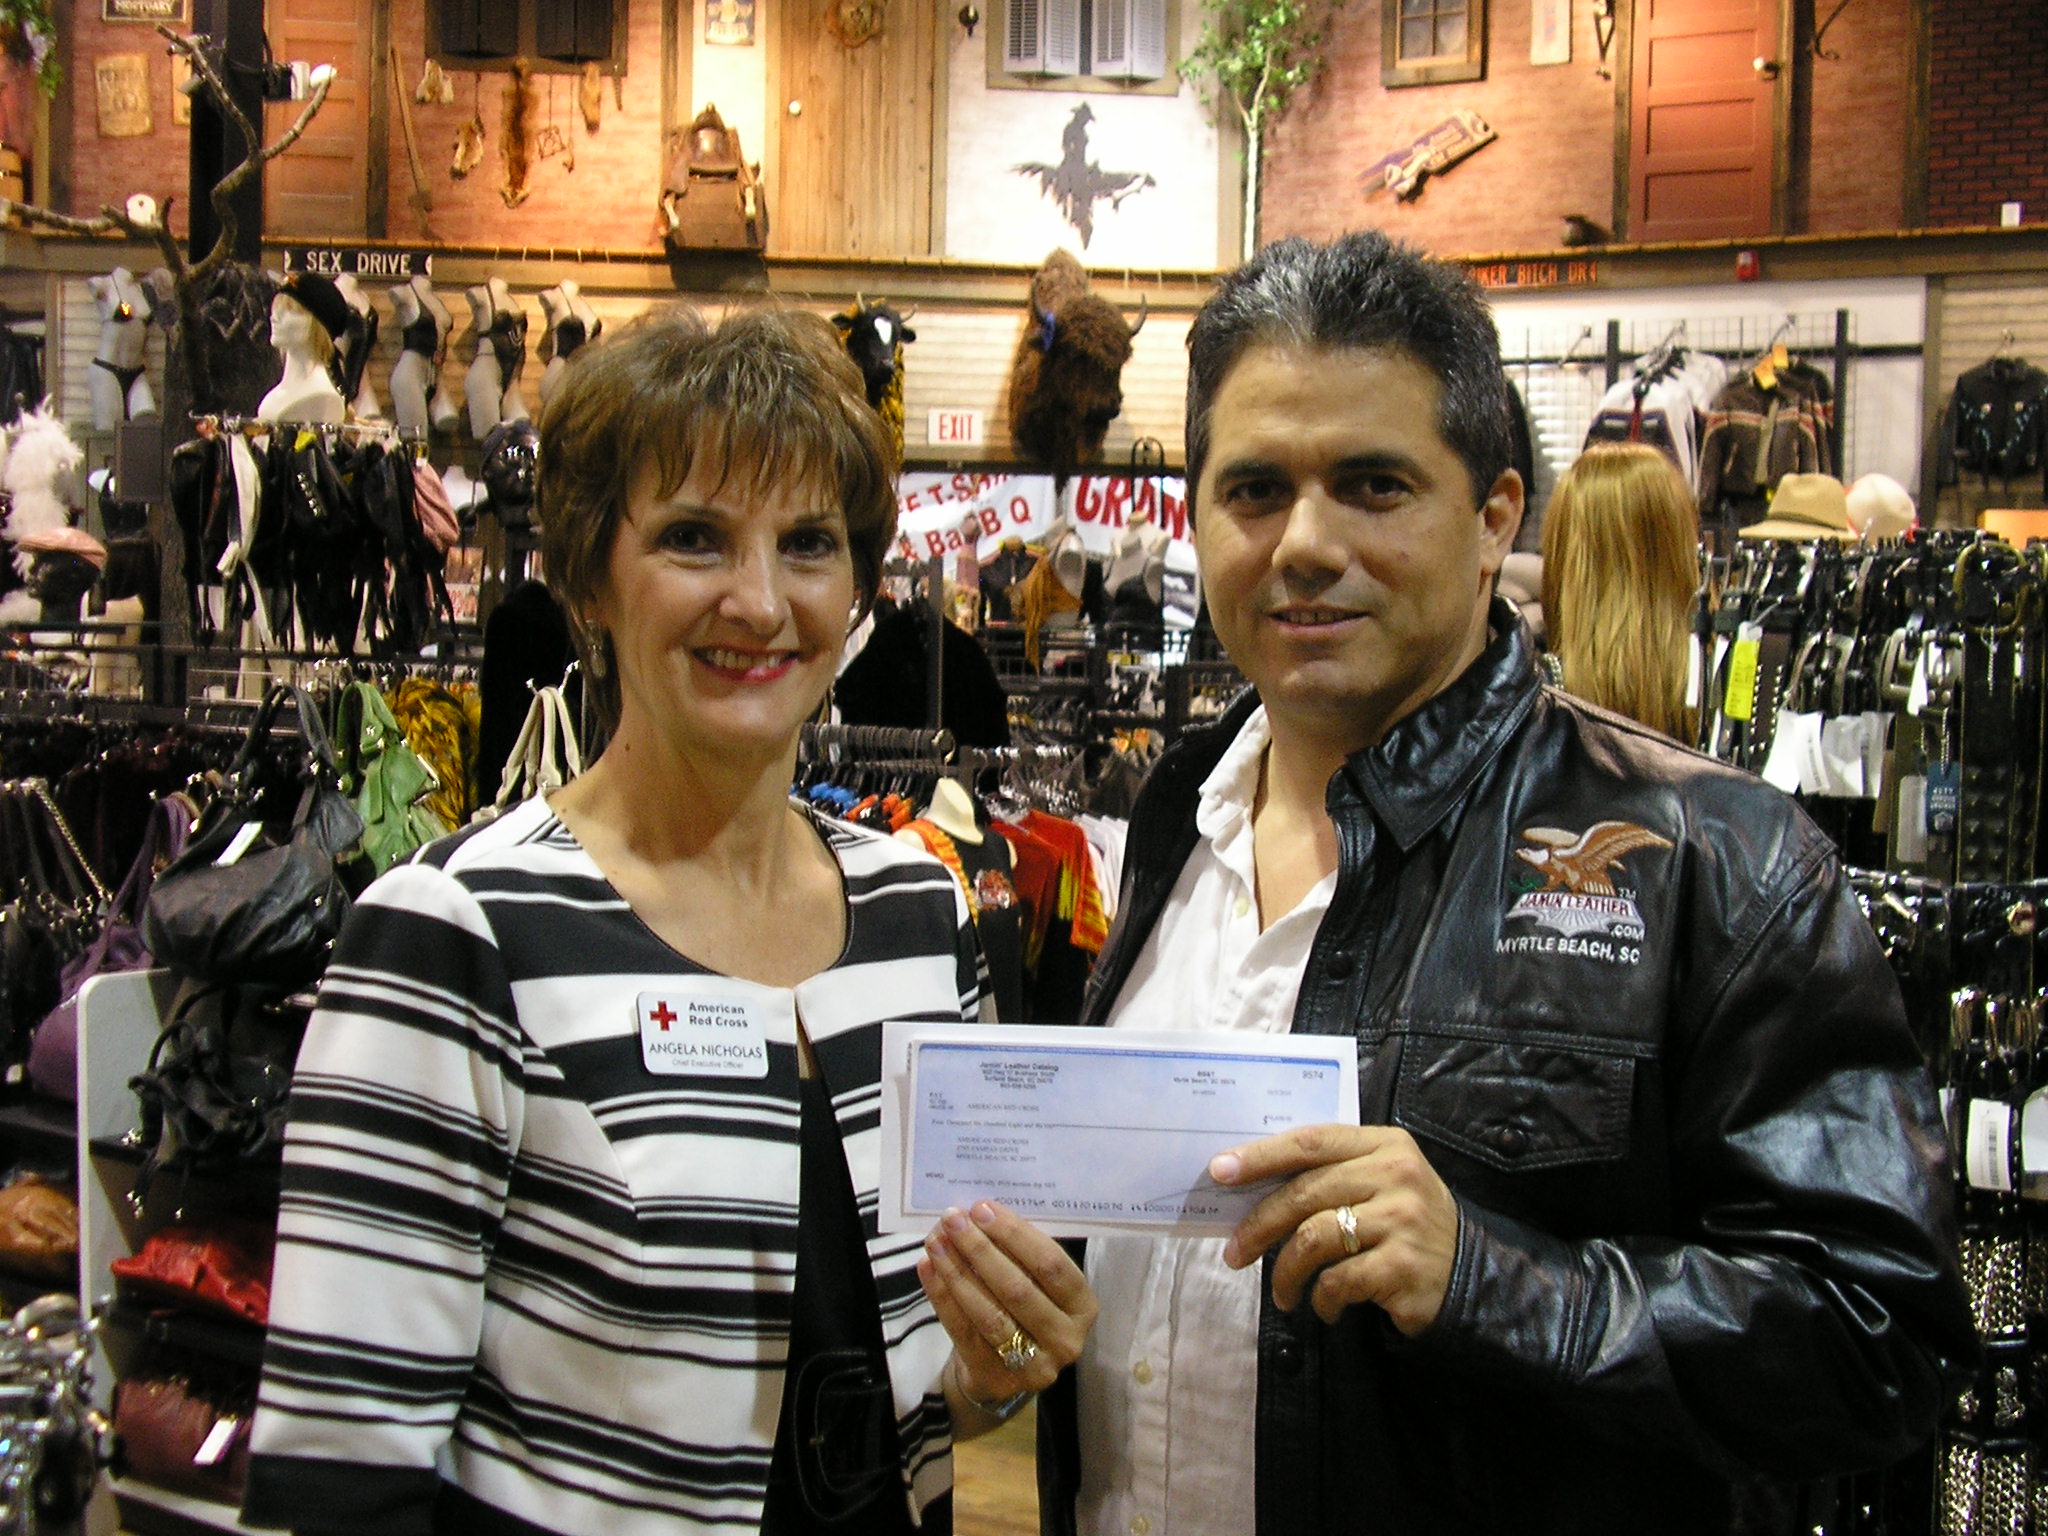 JAMIN LEATHER SUPPORTS LOCAL ORGANIZATIONS